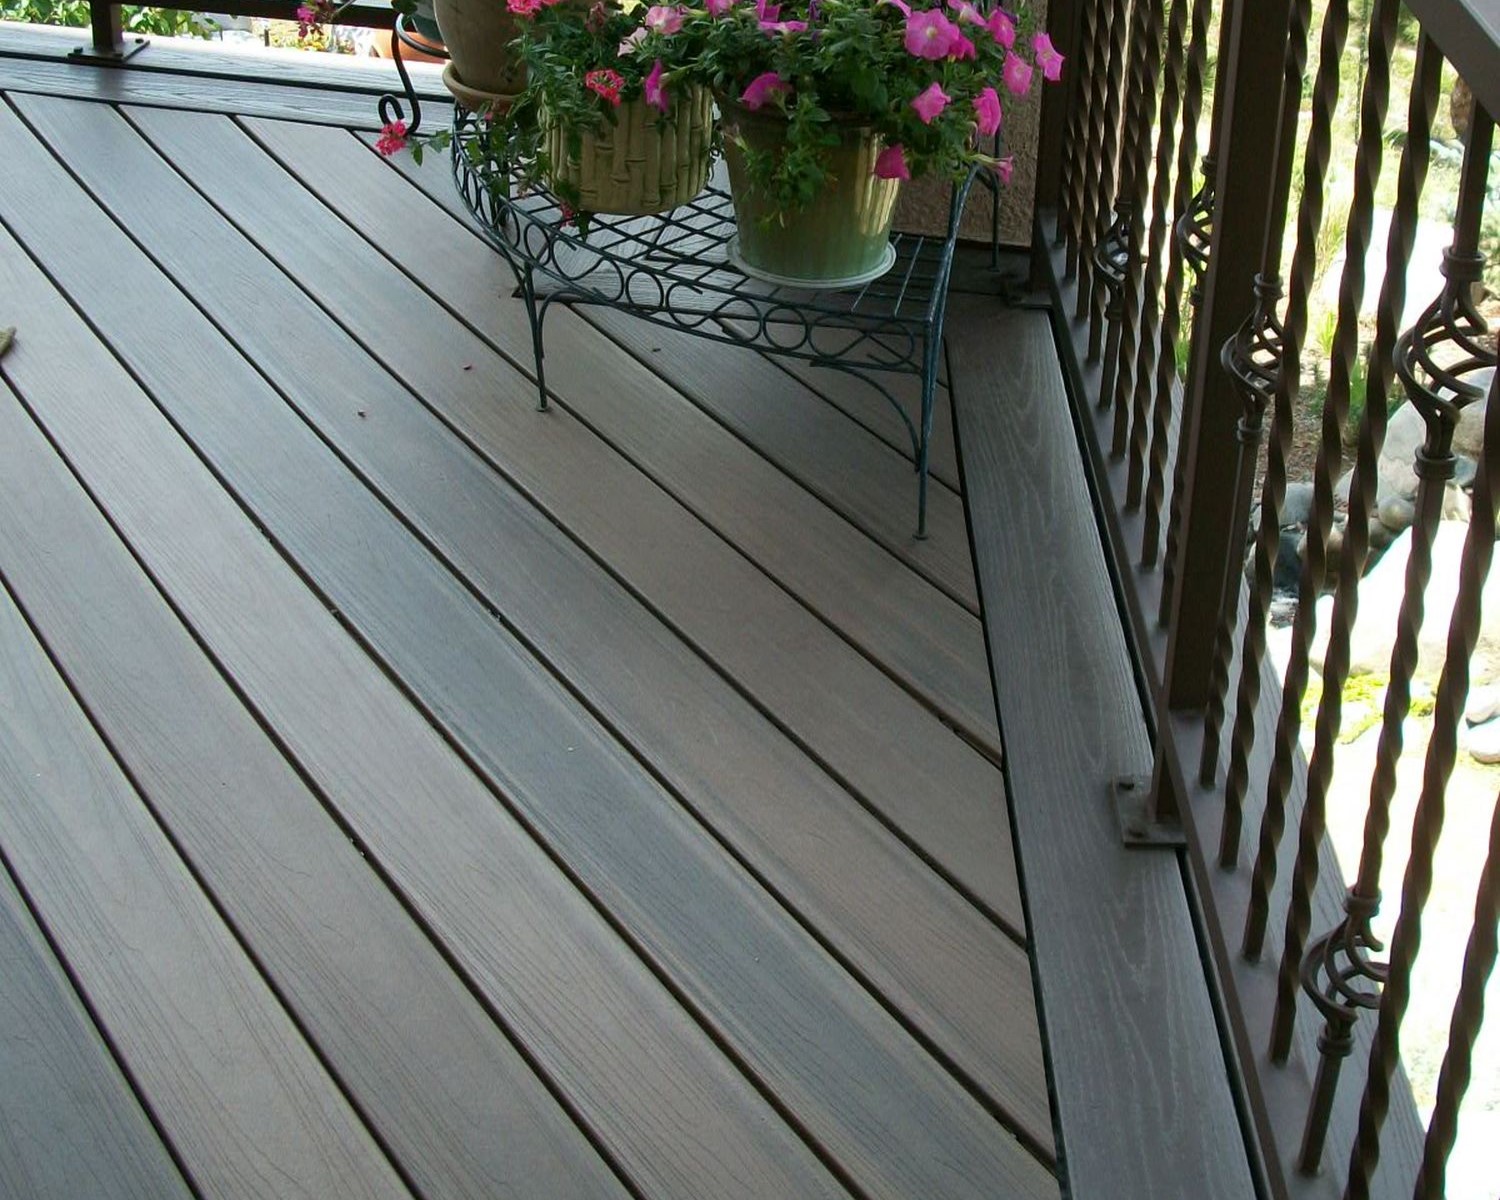 Composite decking laid at a 45-degree angle with a double picture frame border